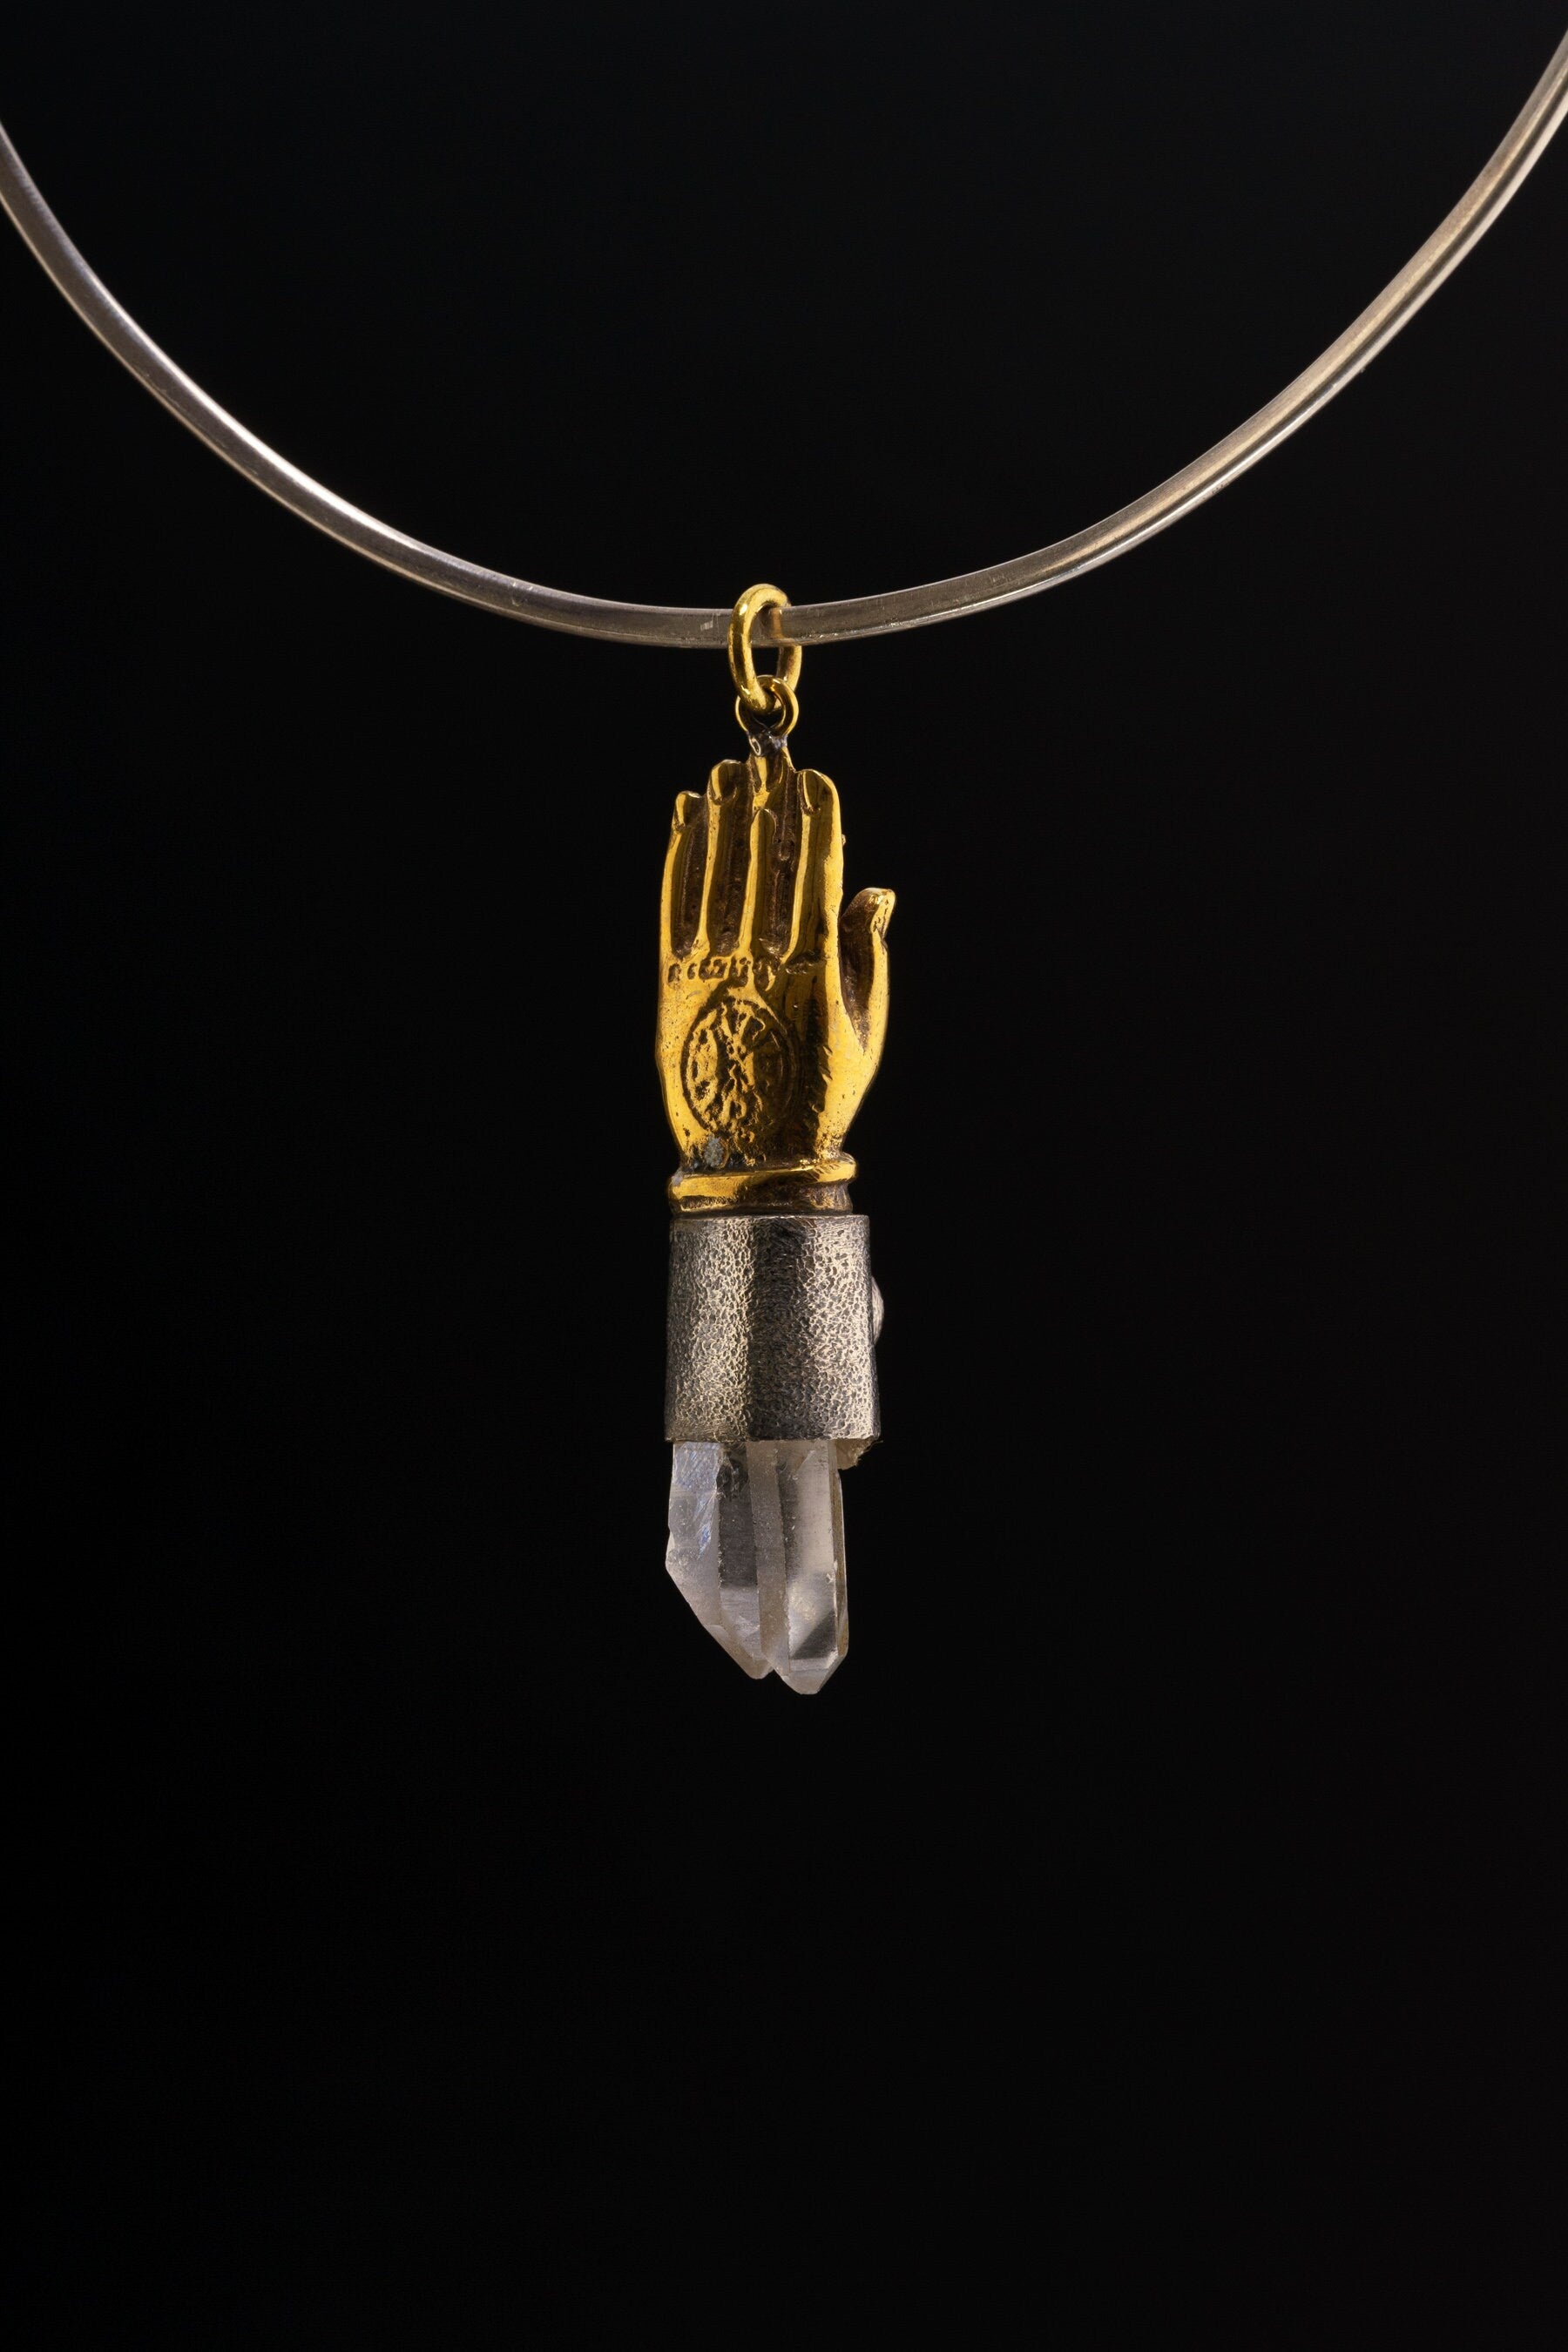 Twin Terminated Himalayan Quartz & Smoky Quartz Cabochon - Brushed Sterling Silver - Monkey King in Buddhas Hand - Crystal Pendant